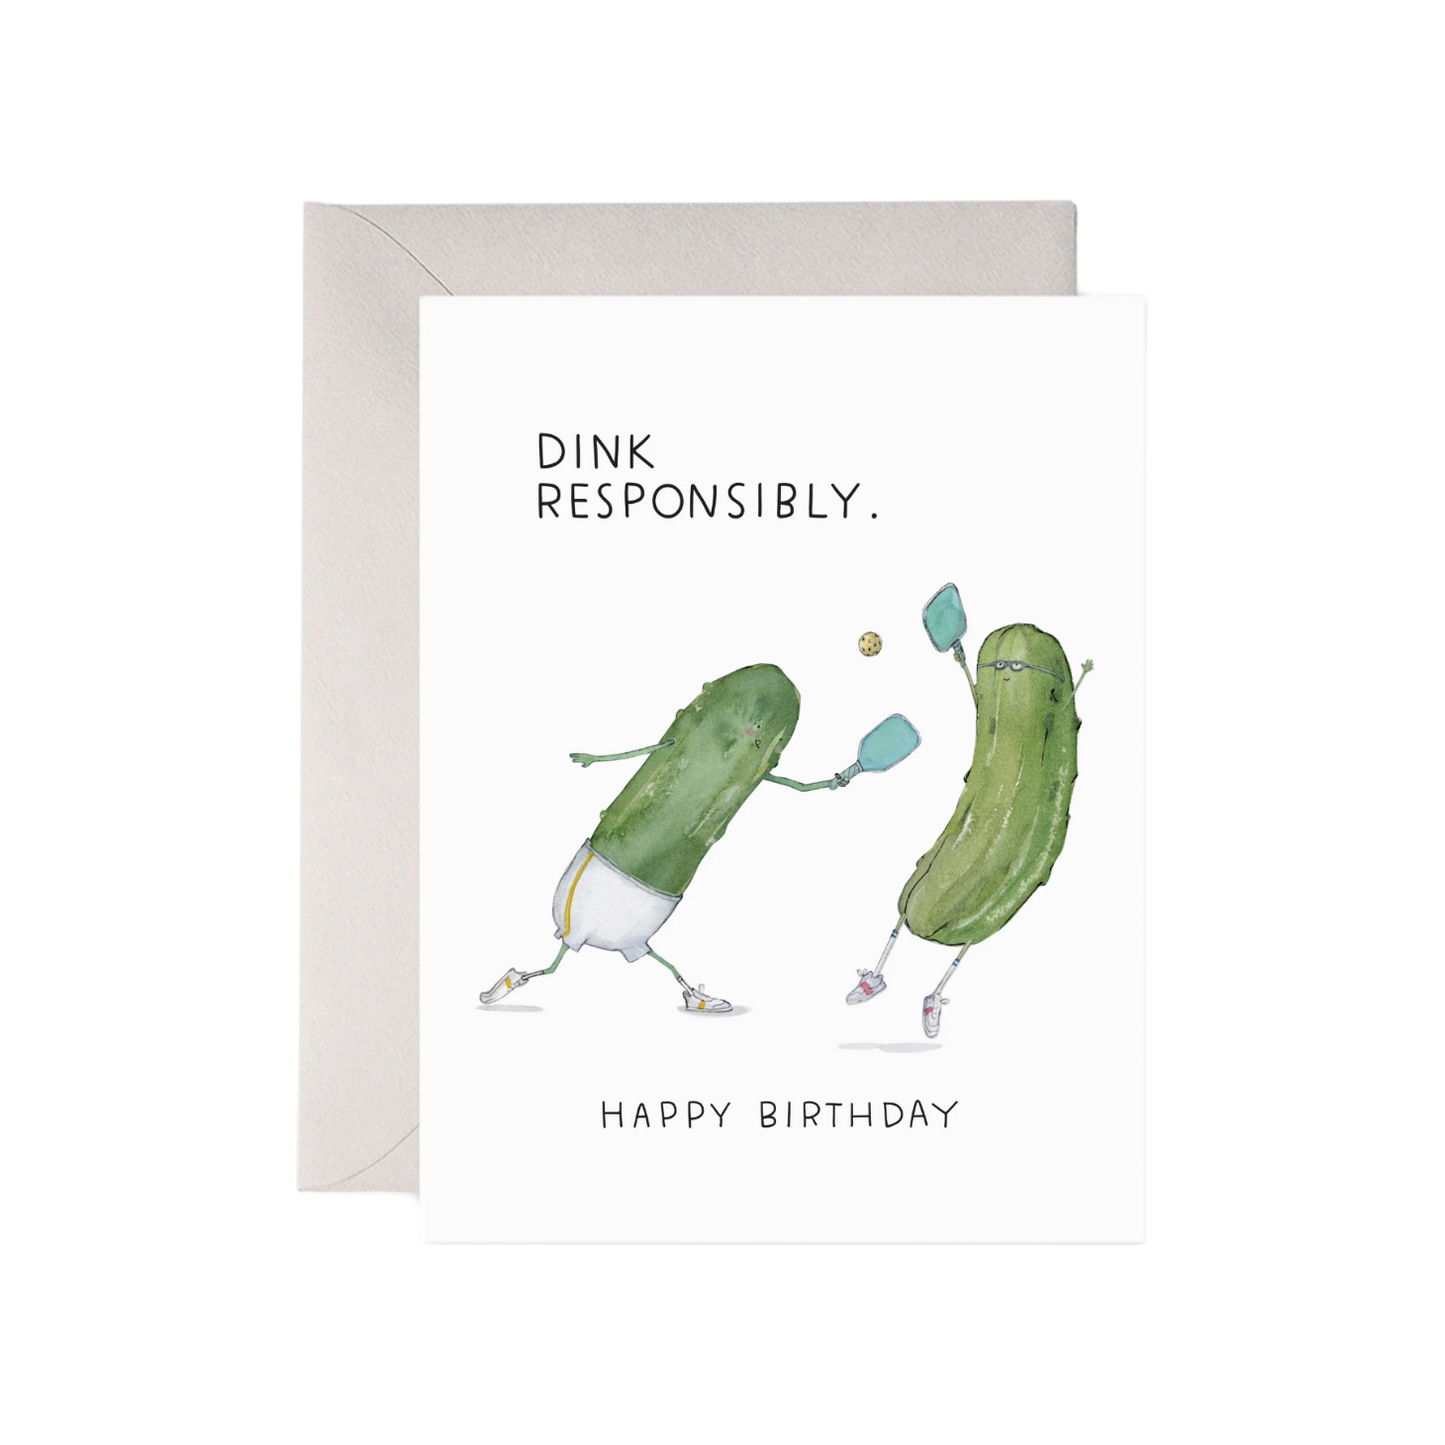 Pickle Ball B-day Card by E. Frances Paper 